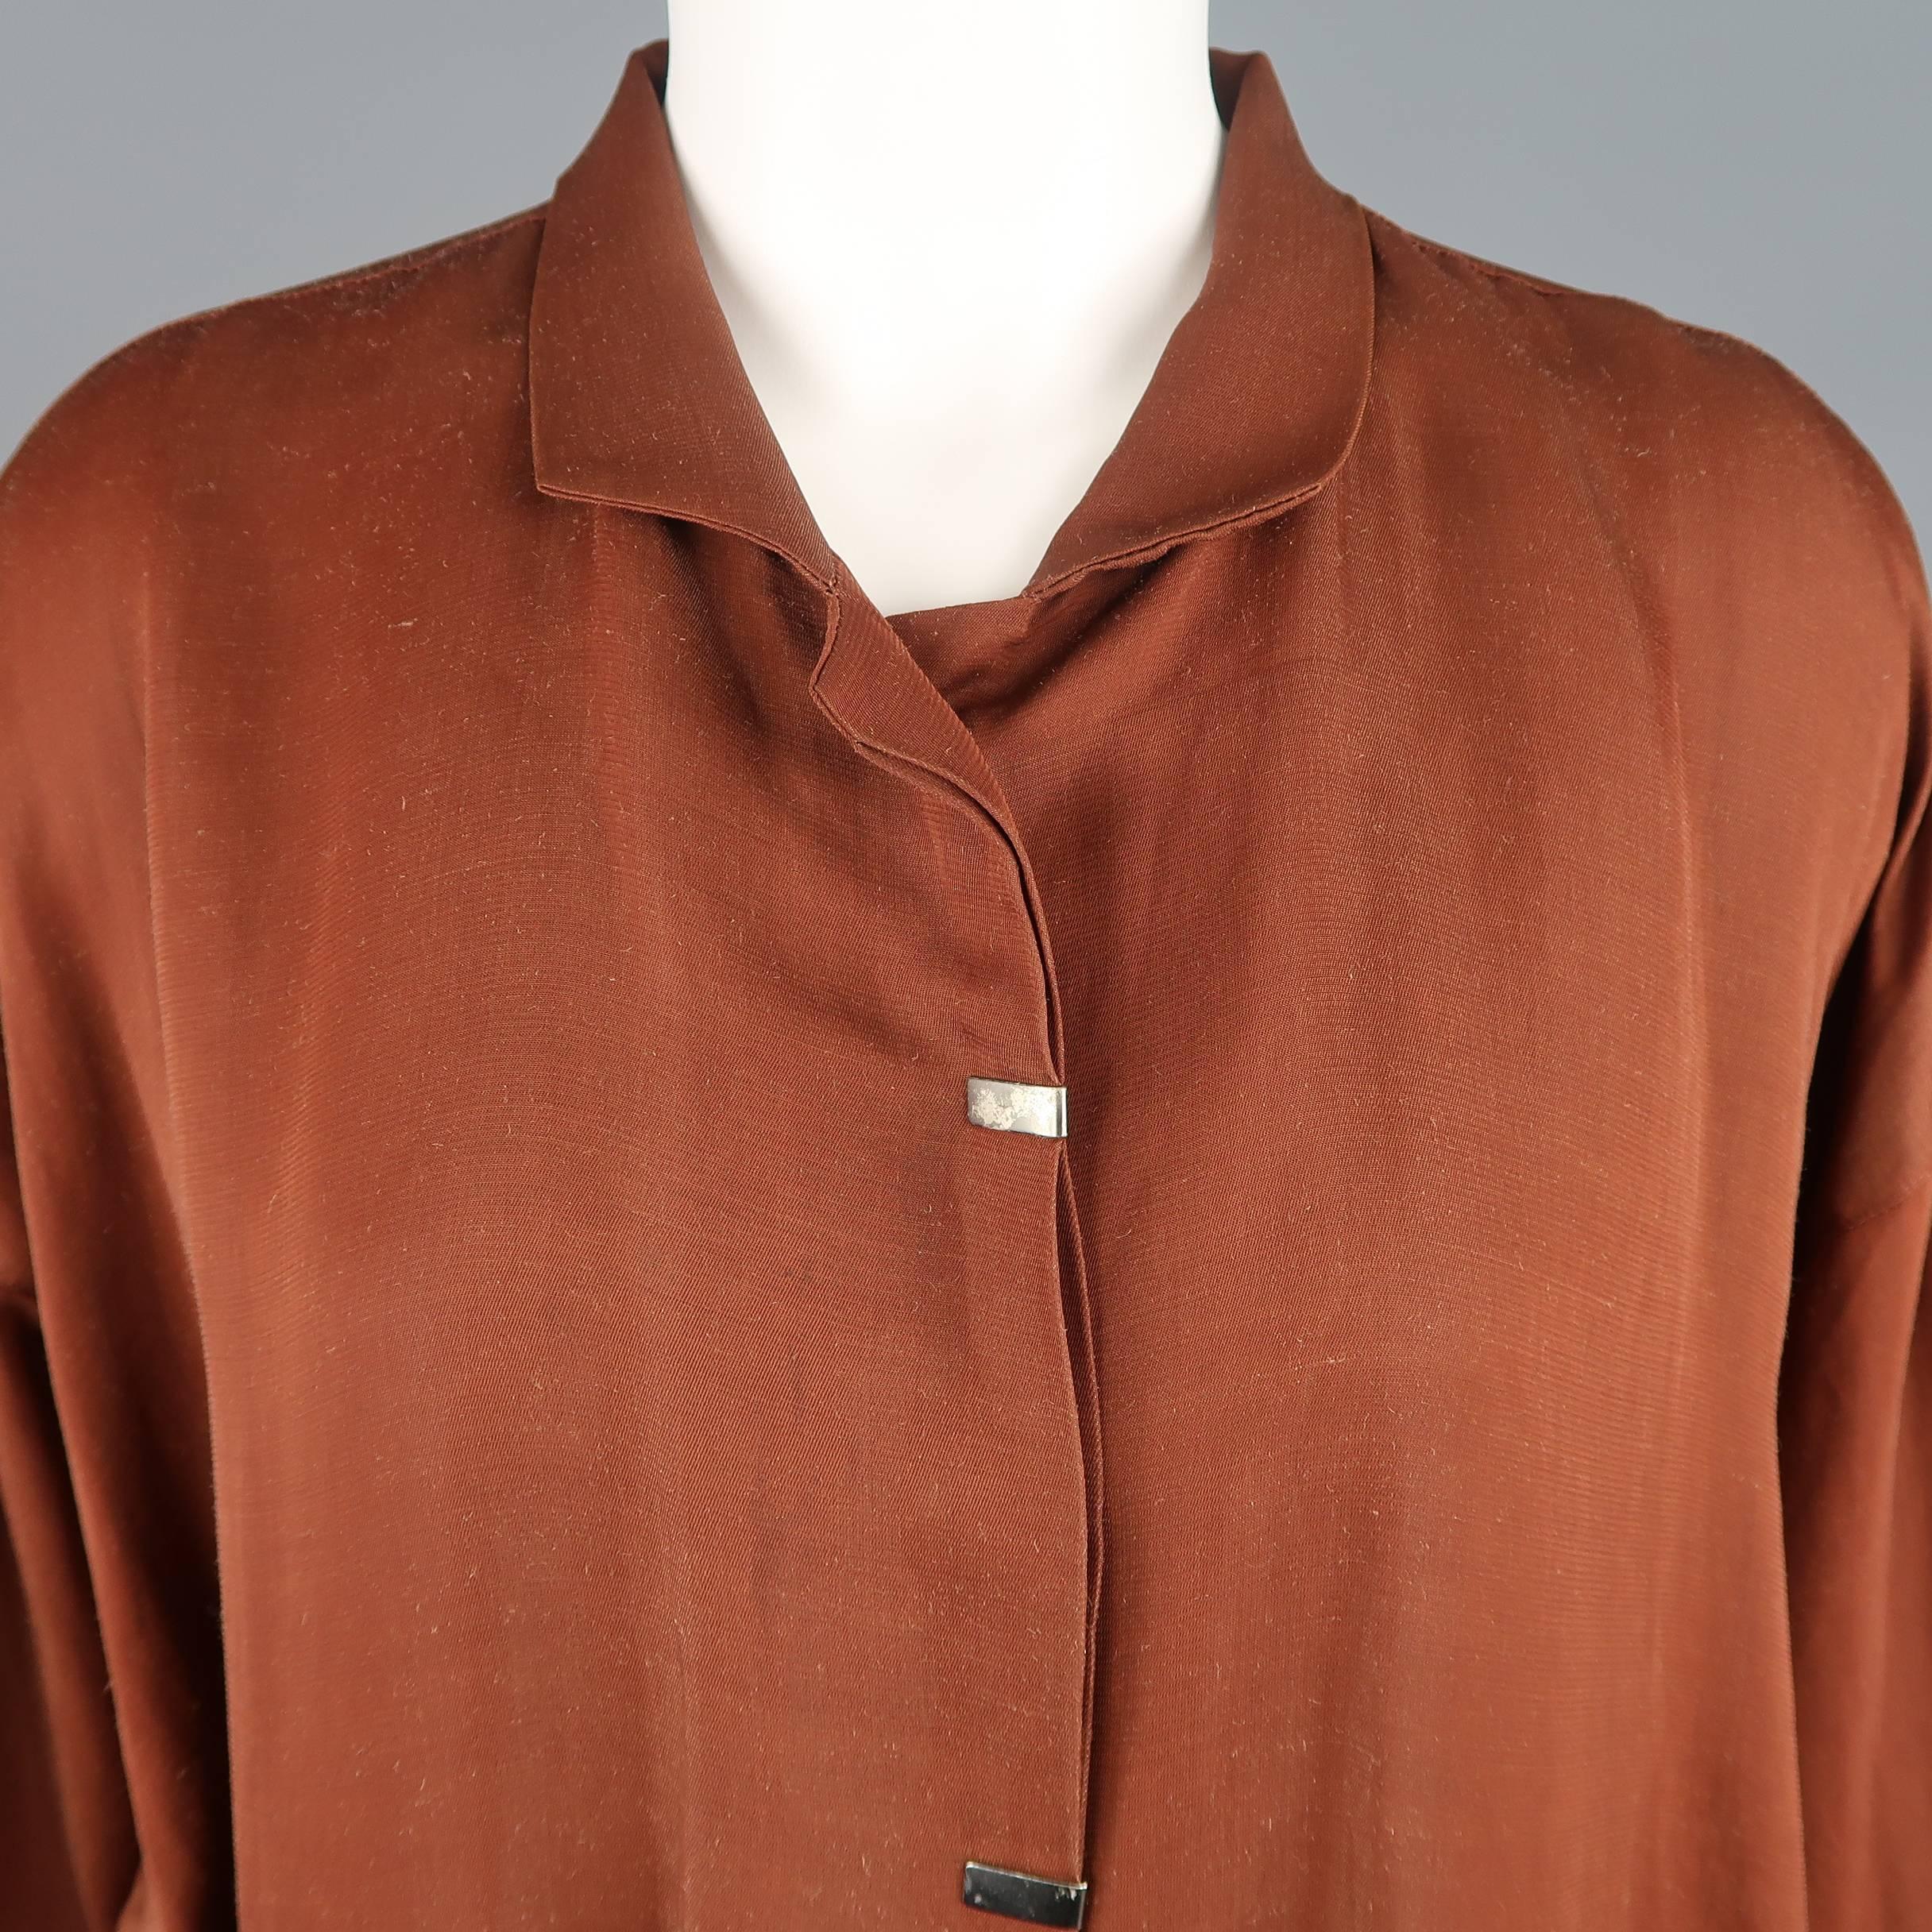 Vintage Issey Miyake oversized jacket comes in light weight rust brown fabric with a small collar, hidden placket button closure with silver tone metal embellishments, slit pockets, and weighted sides. Wear throughout. As-is. Made in Japan.
 
Fair